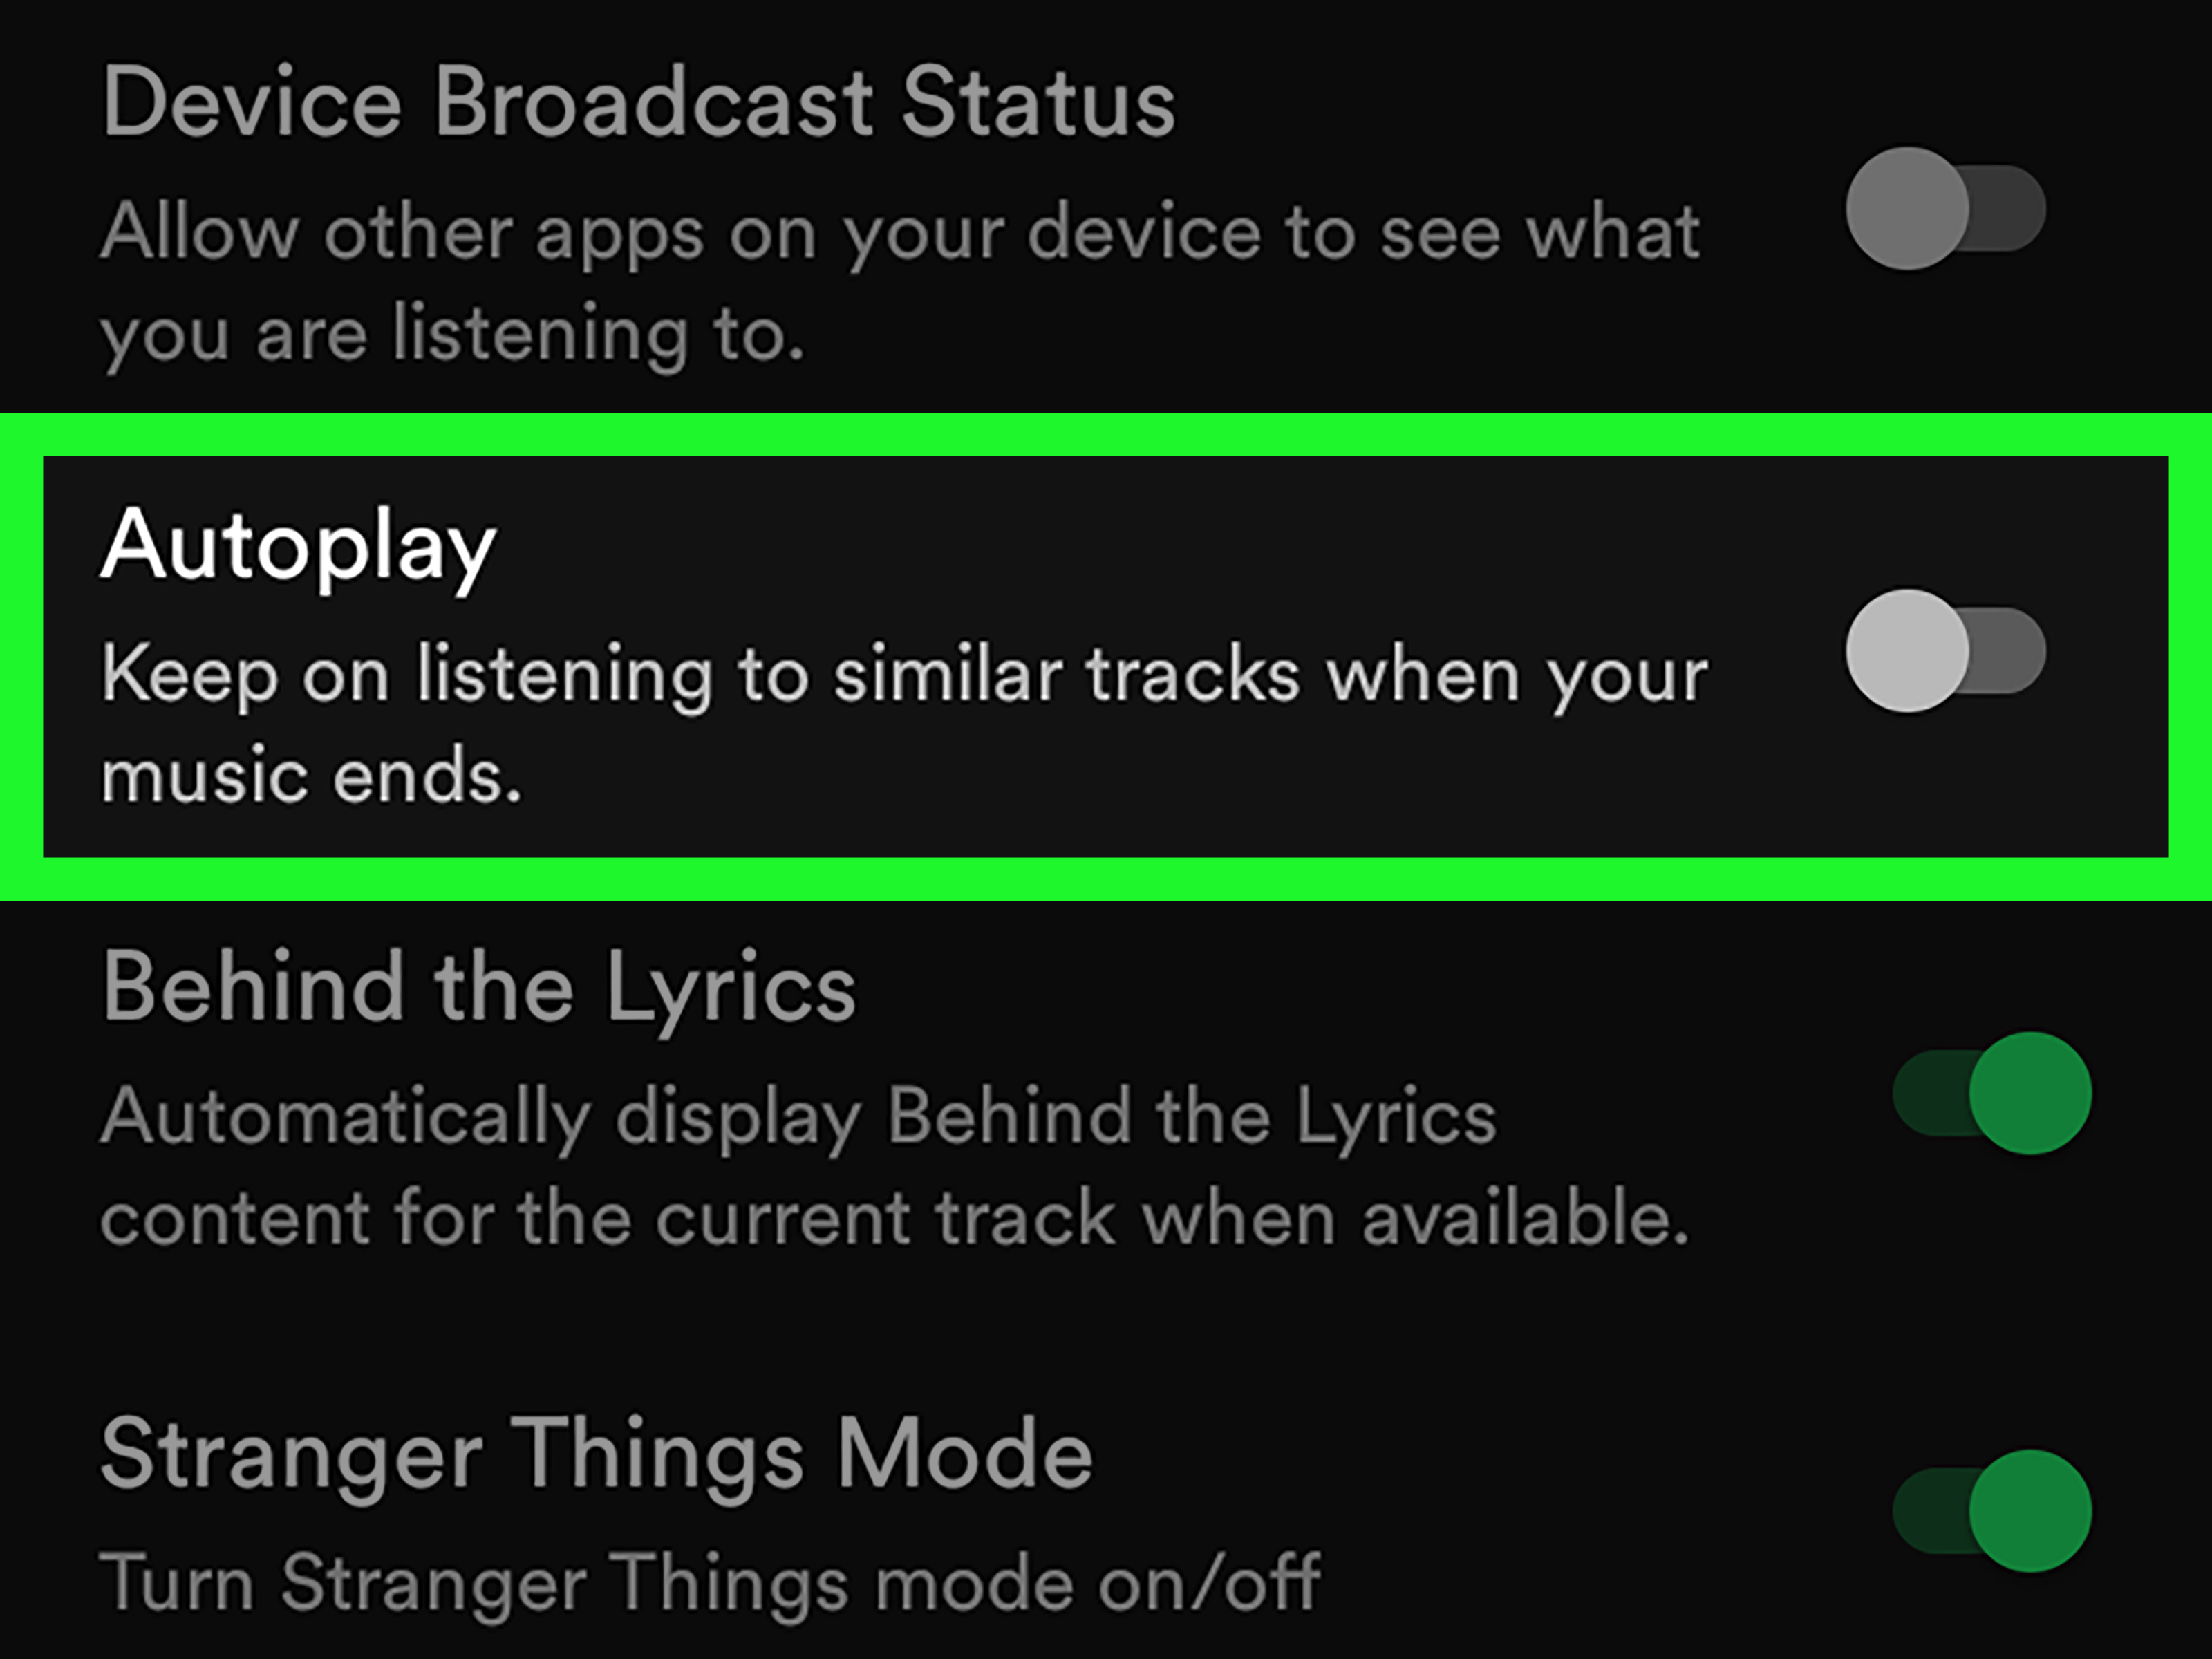 Spotify shared queue